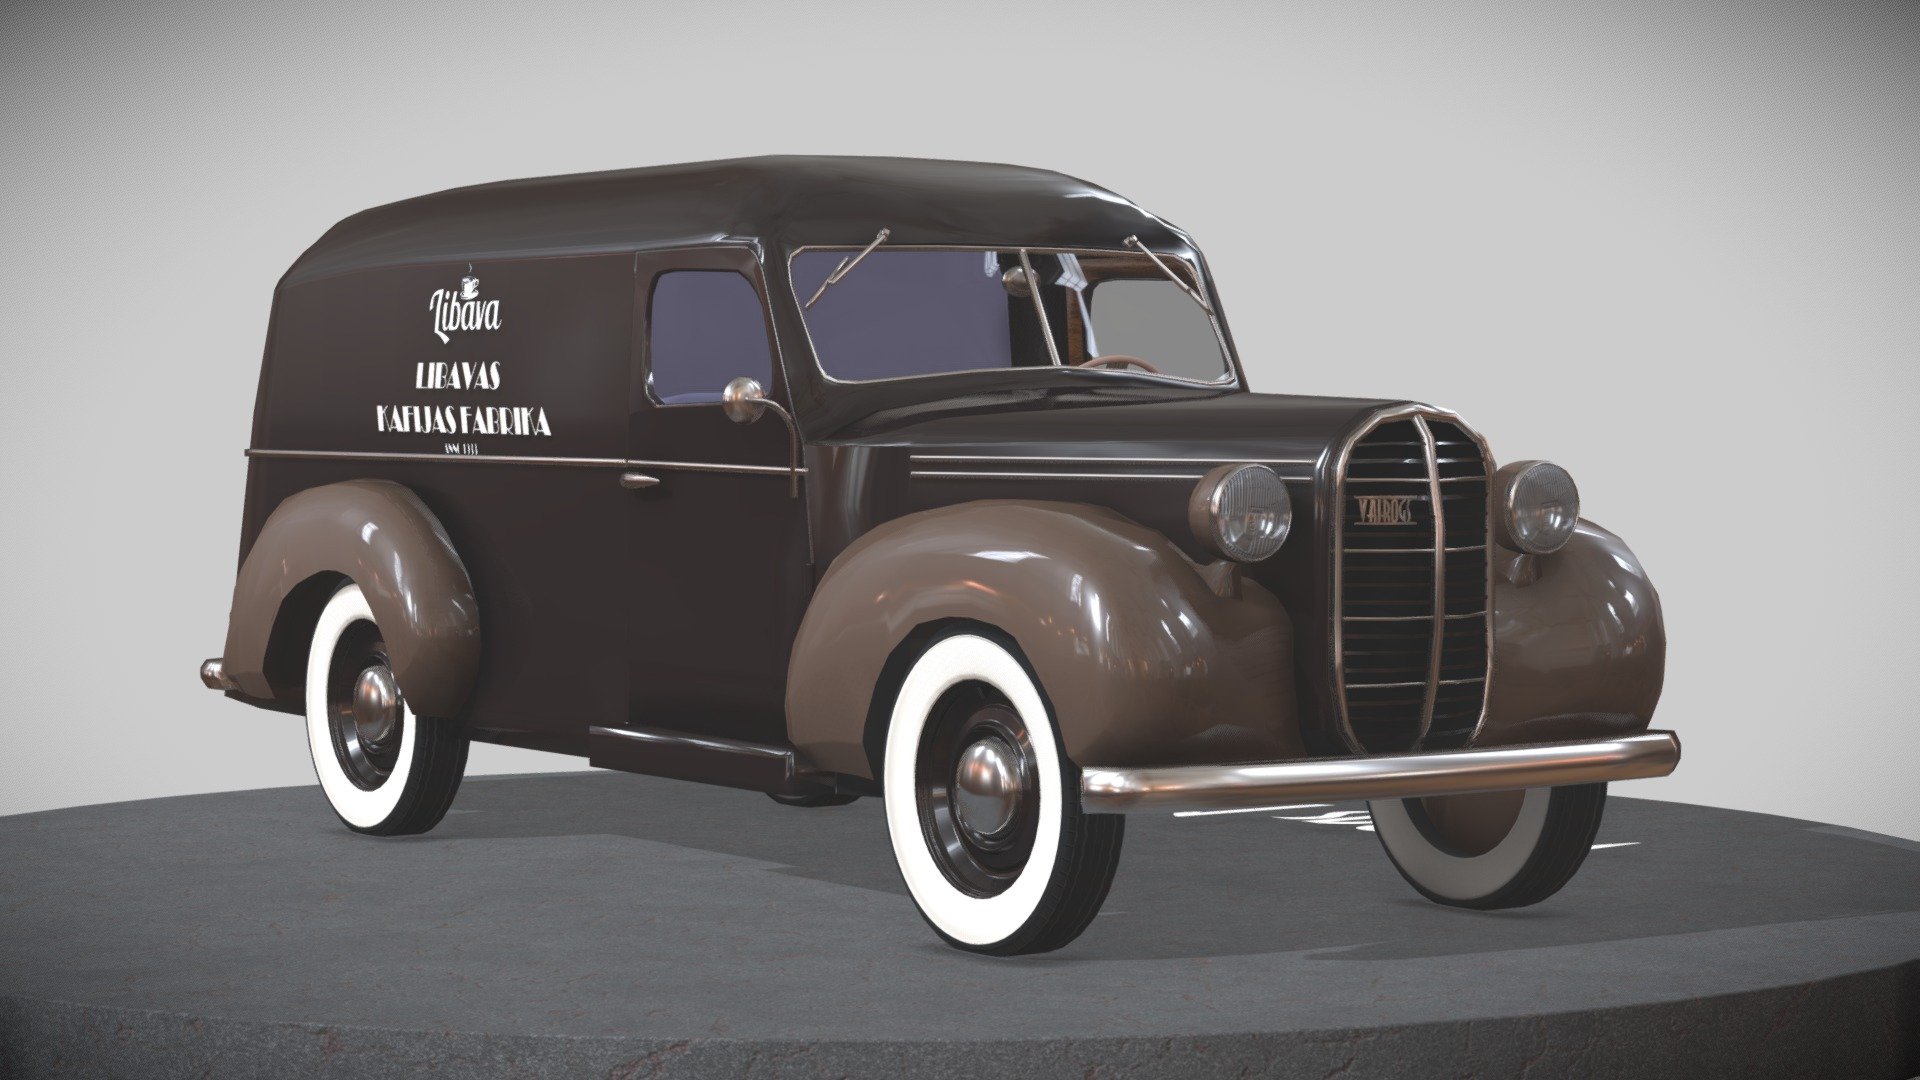 A Panel van, manufactured by Ford-Vairogs in the 1930s, with the Liepājas Kafija (or in my game project Libava) livery 3d model